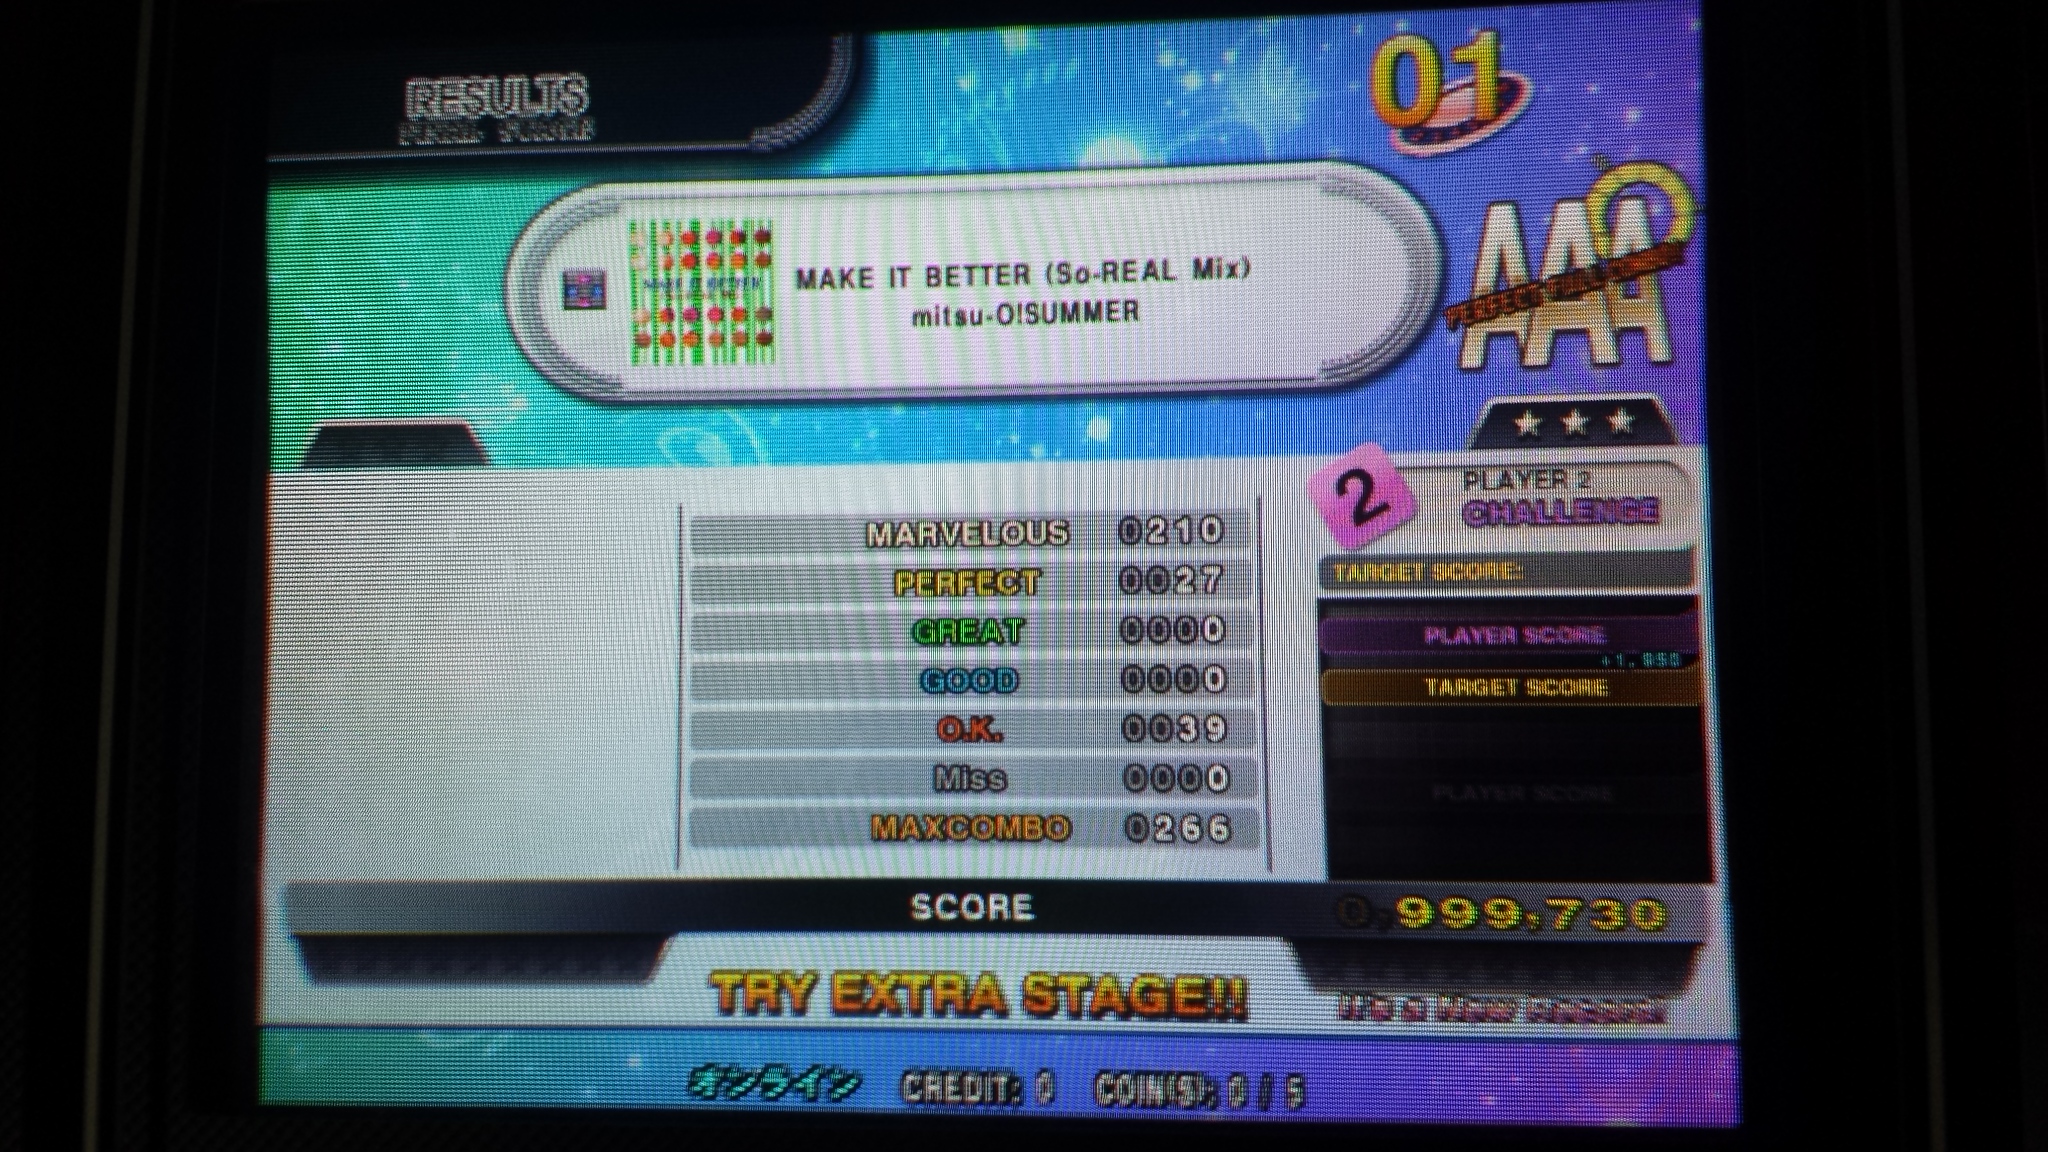 MAKE IT BETTER (So-REAL Mix) CSP DDR 2013 AC